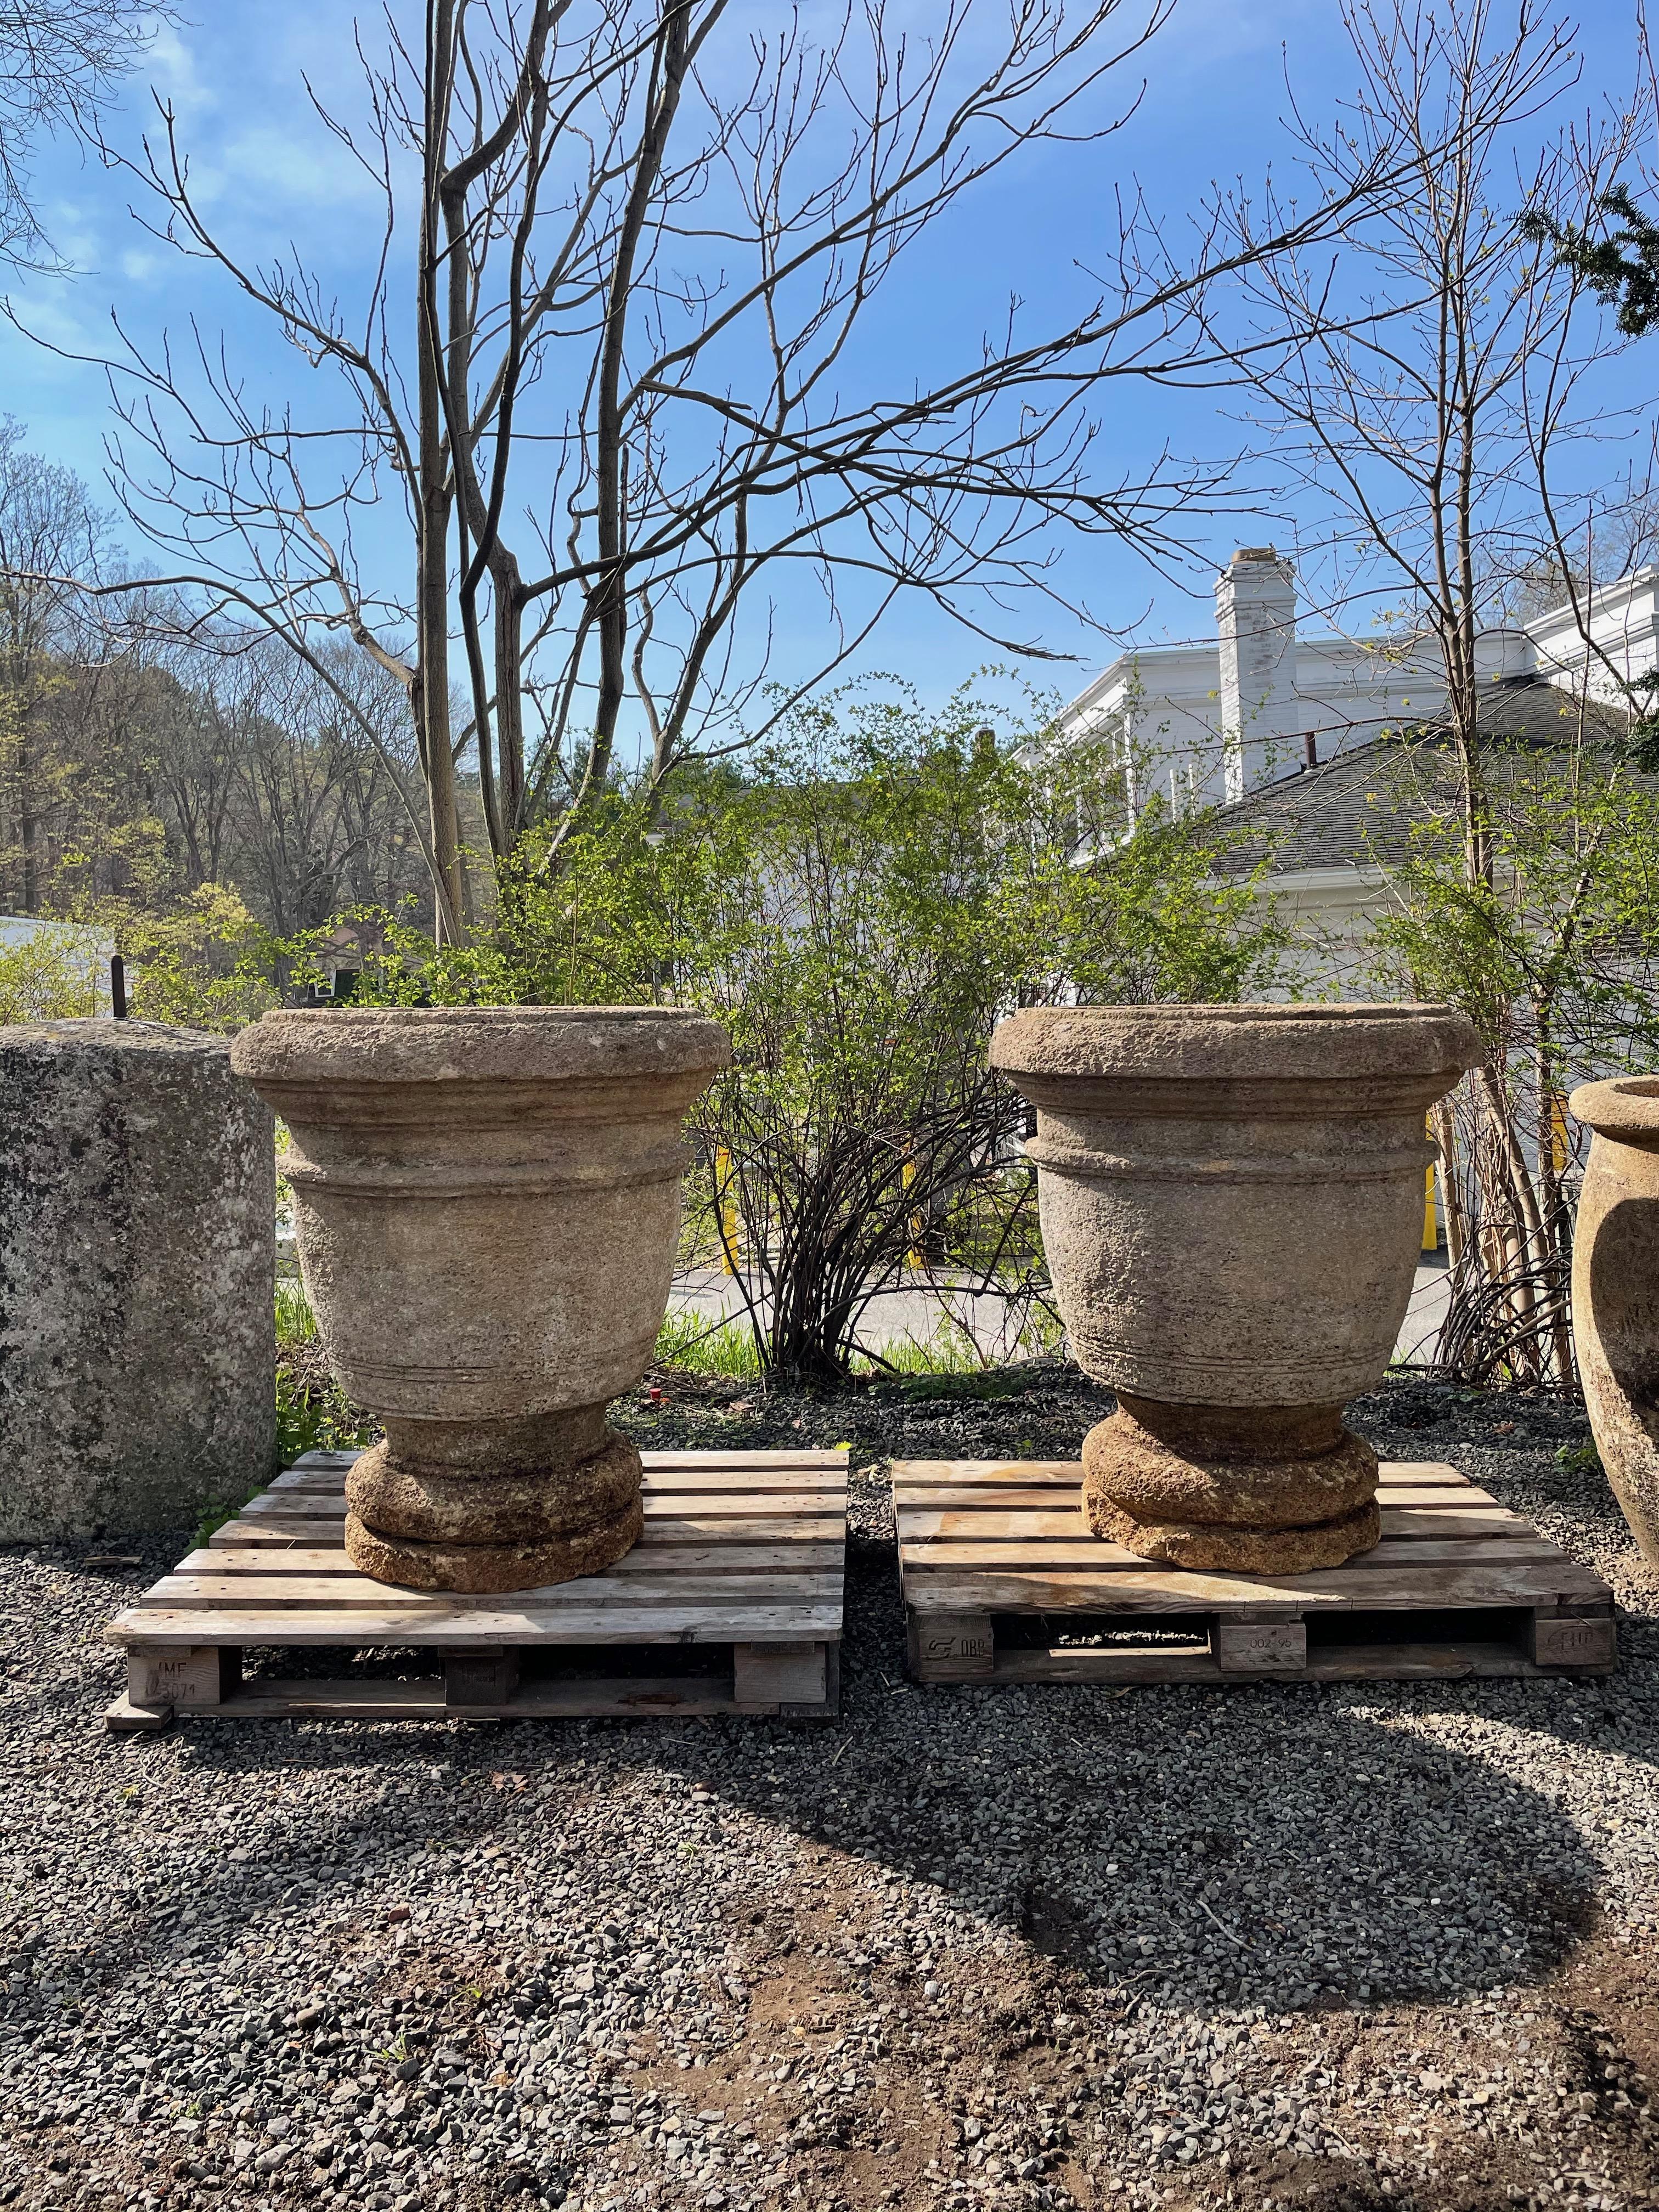 Recently, we were able to source five enormous stone pots/planters carved from Pierre de Rognes, a very hard stone from the area of Aix en Provence and they are stunning. Thick-walled, very rare, and in lovely condition, this pair of grand planters